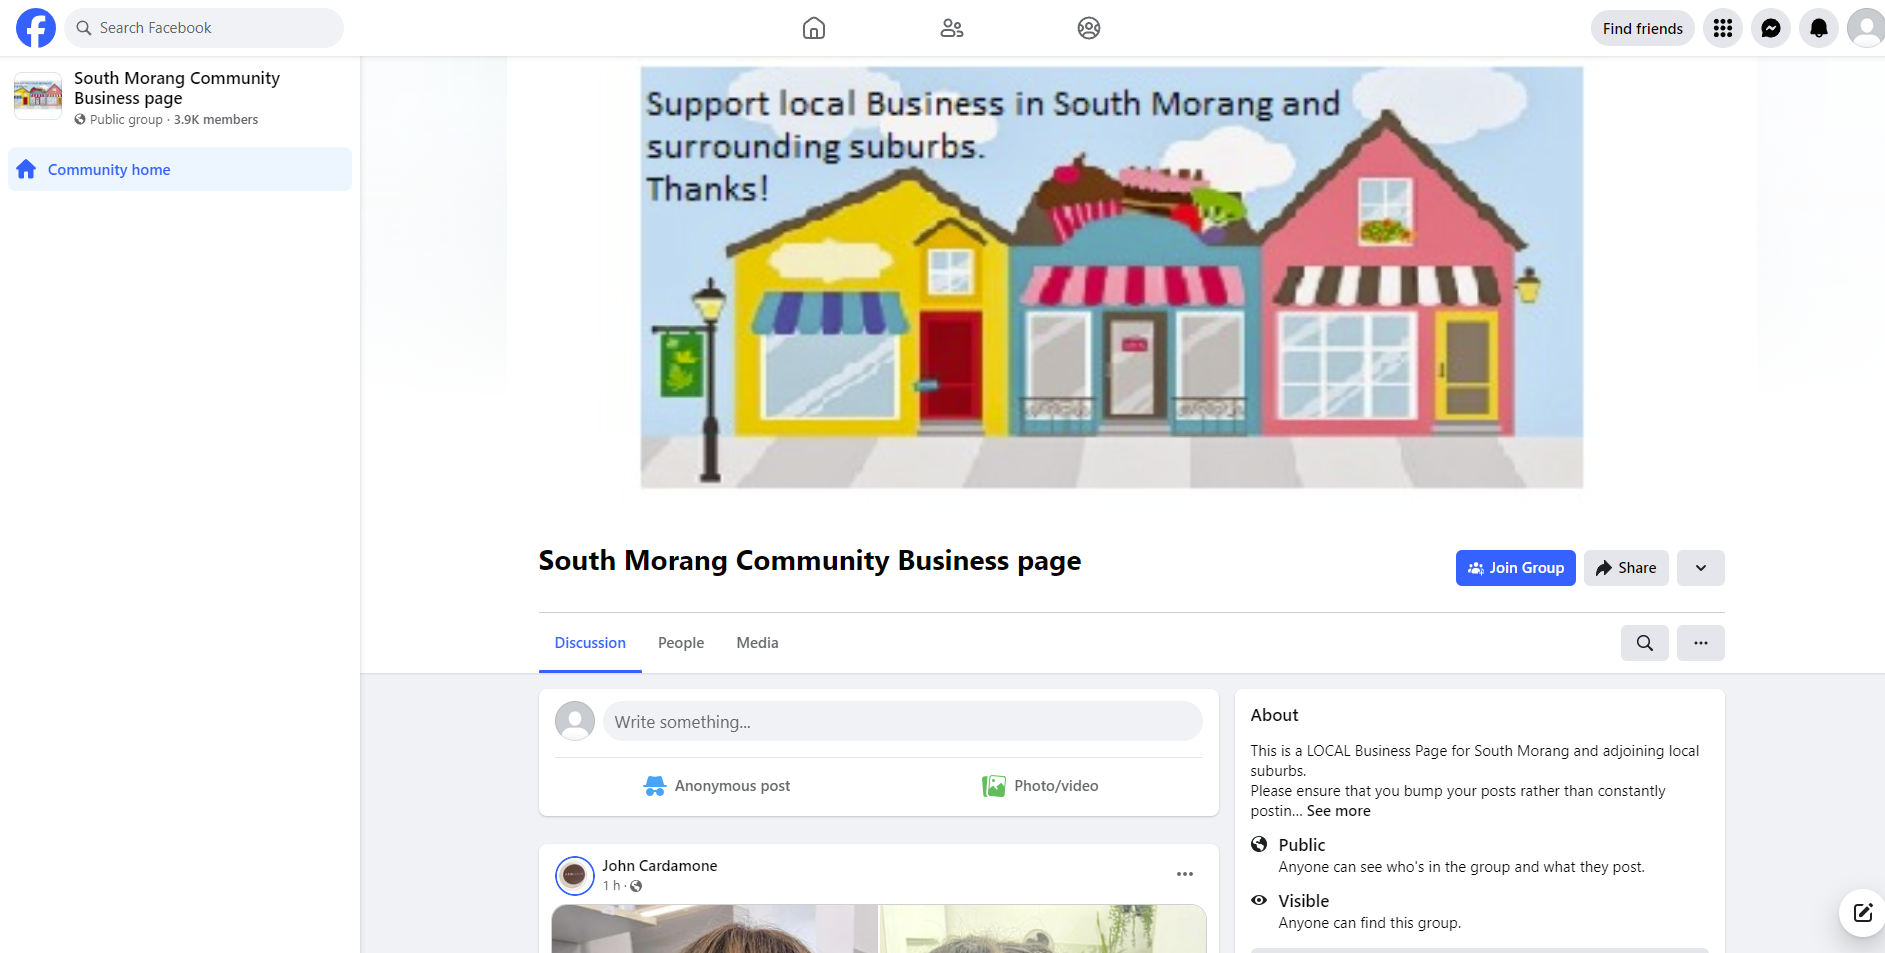 South Morang Community Business Page